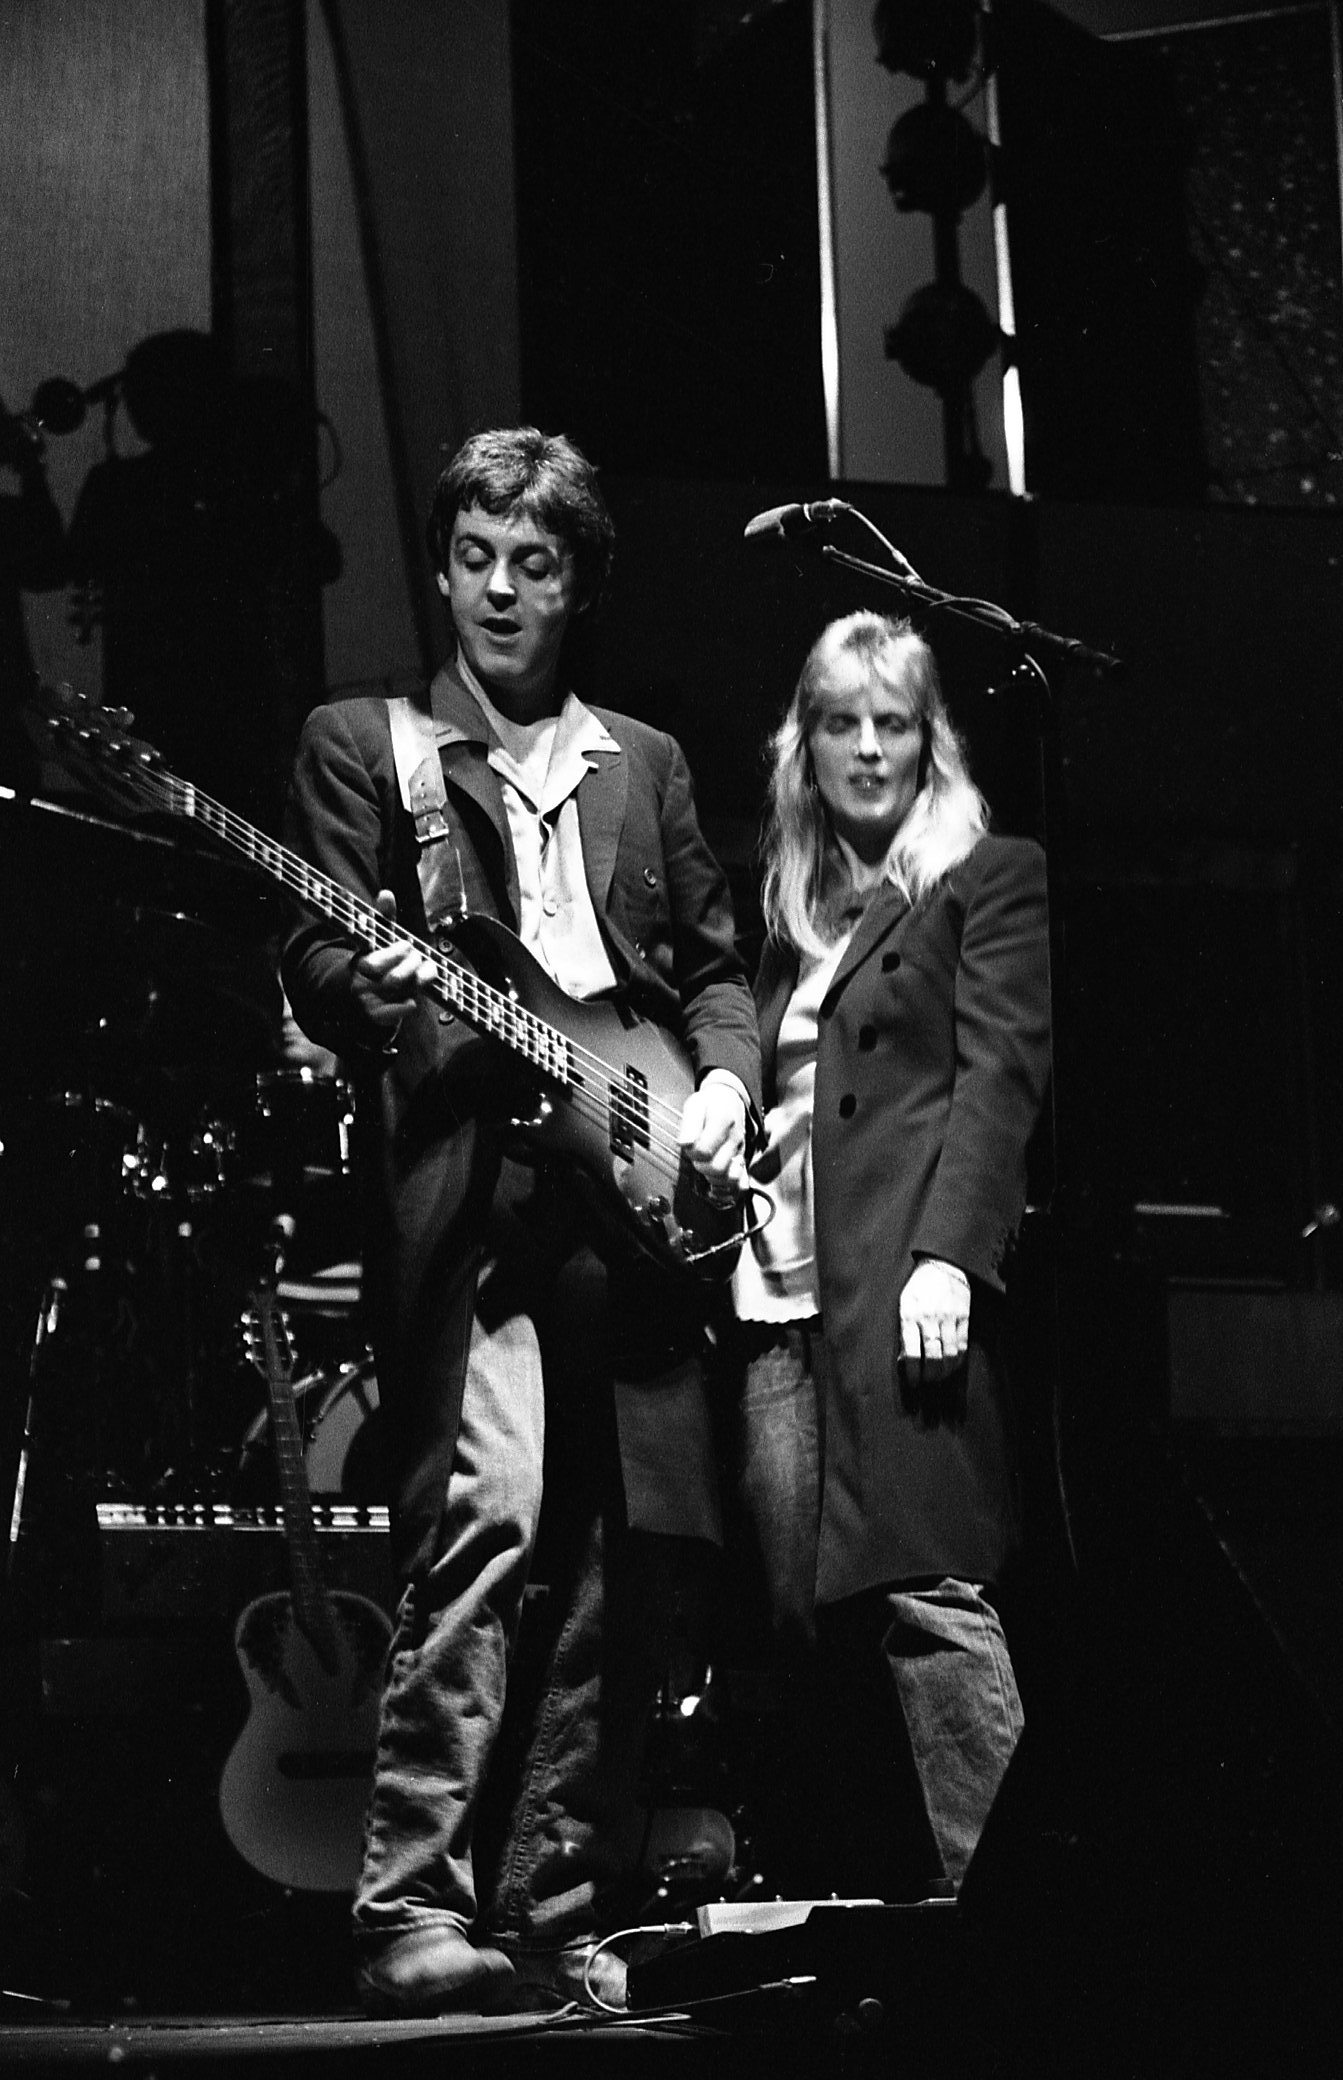 The legend Sir Paul McCartney and his late wife Linda McCartney performing with Wings at The Gaumont Theatre in Southampton. December 1, 1979. THE SOUTHERN DAILY ECHO ARCHIVES. HAMPSHIRE HERITAGE SUPPLEMENT. Ref: 5386g